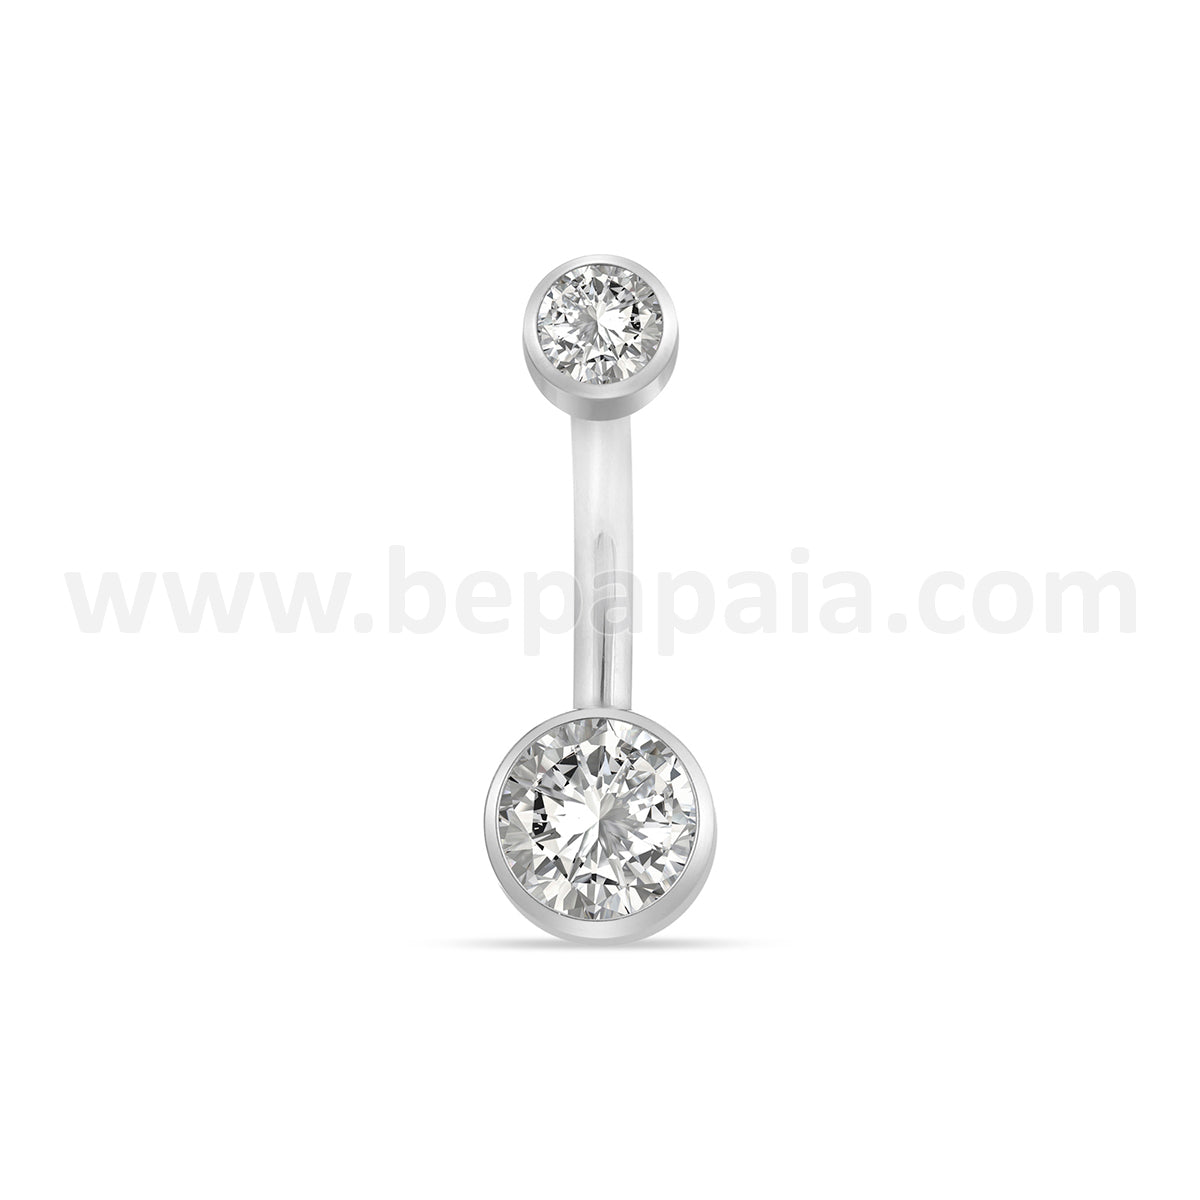 Titanium belly button ring with double CZ